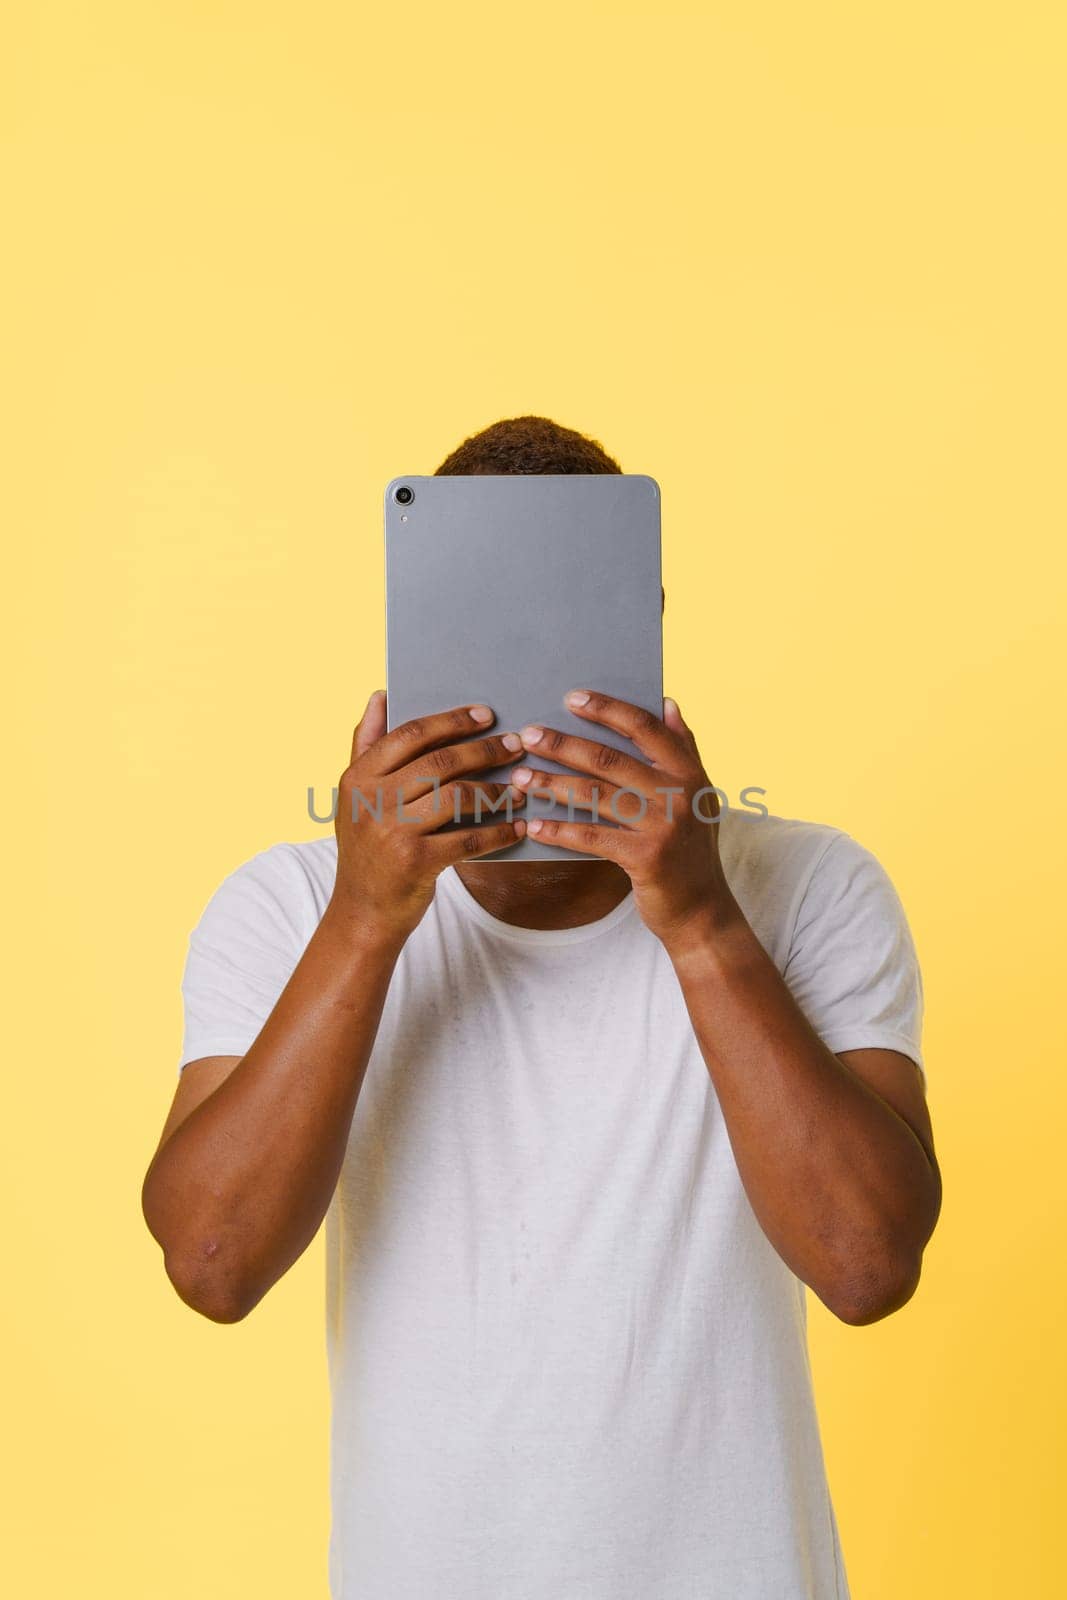 Anonymity incognito online concept. Anonymous African American person holding tablet PC in hands, with hidden face isolated on bright yellow background with copy space for designers to add their own text or graphics. by LipikStockMedia